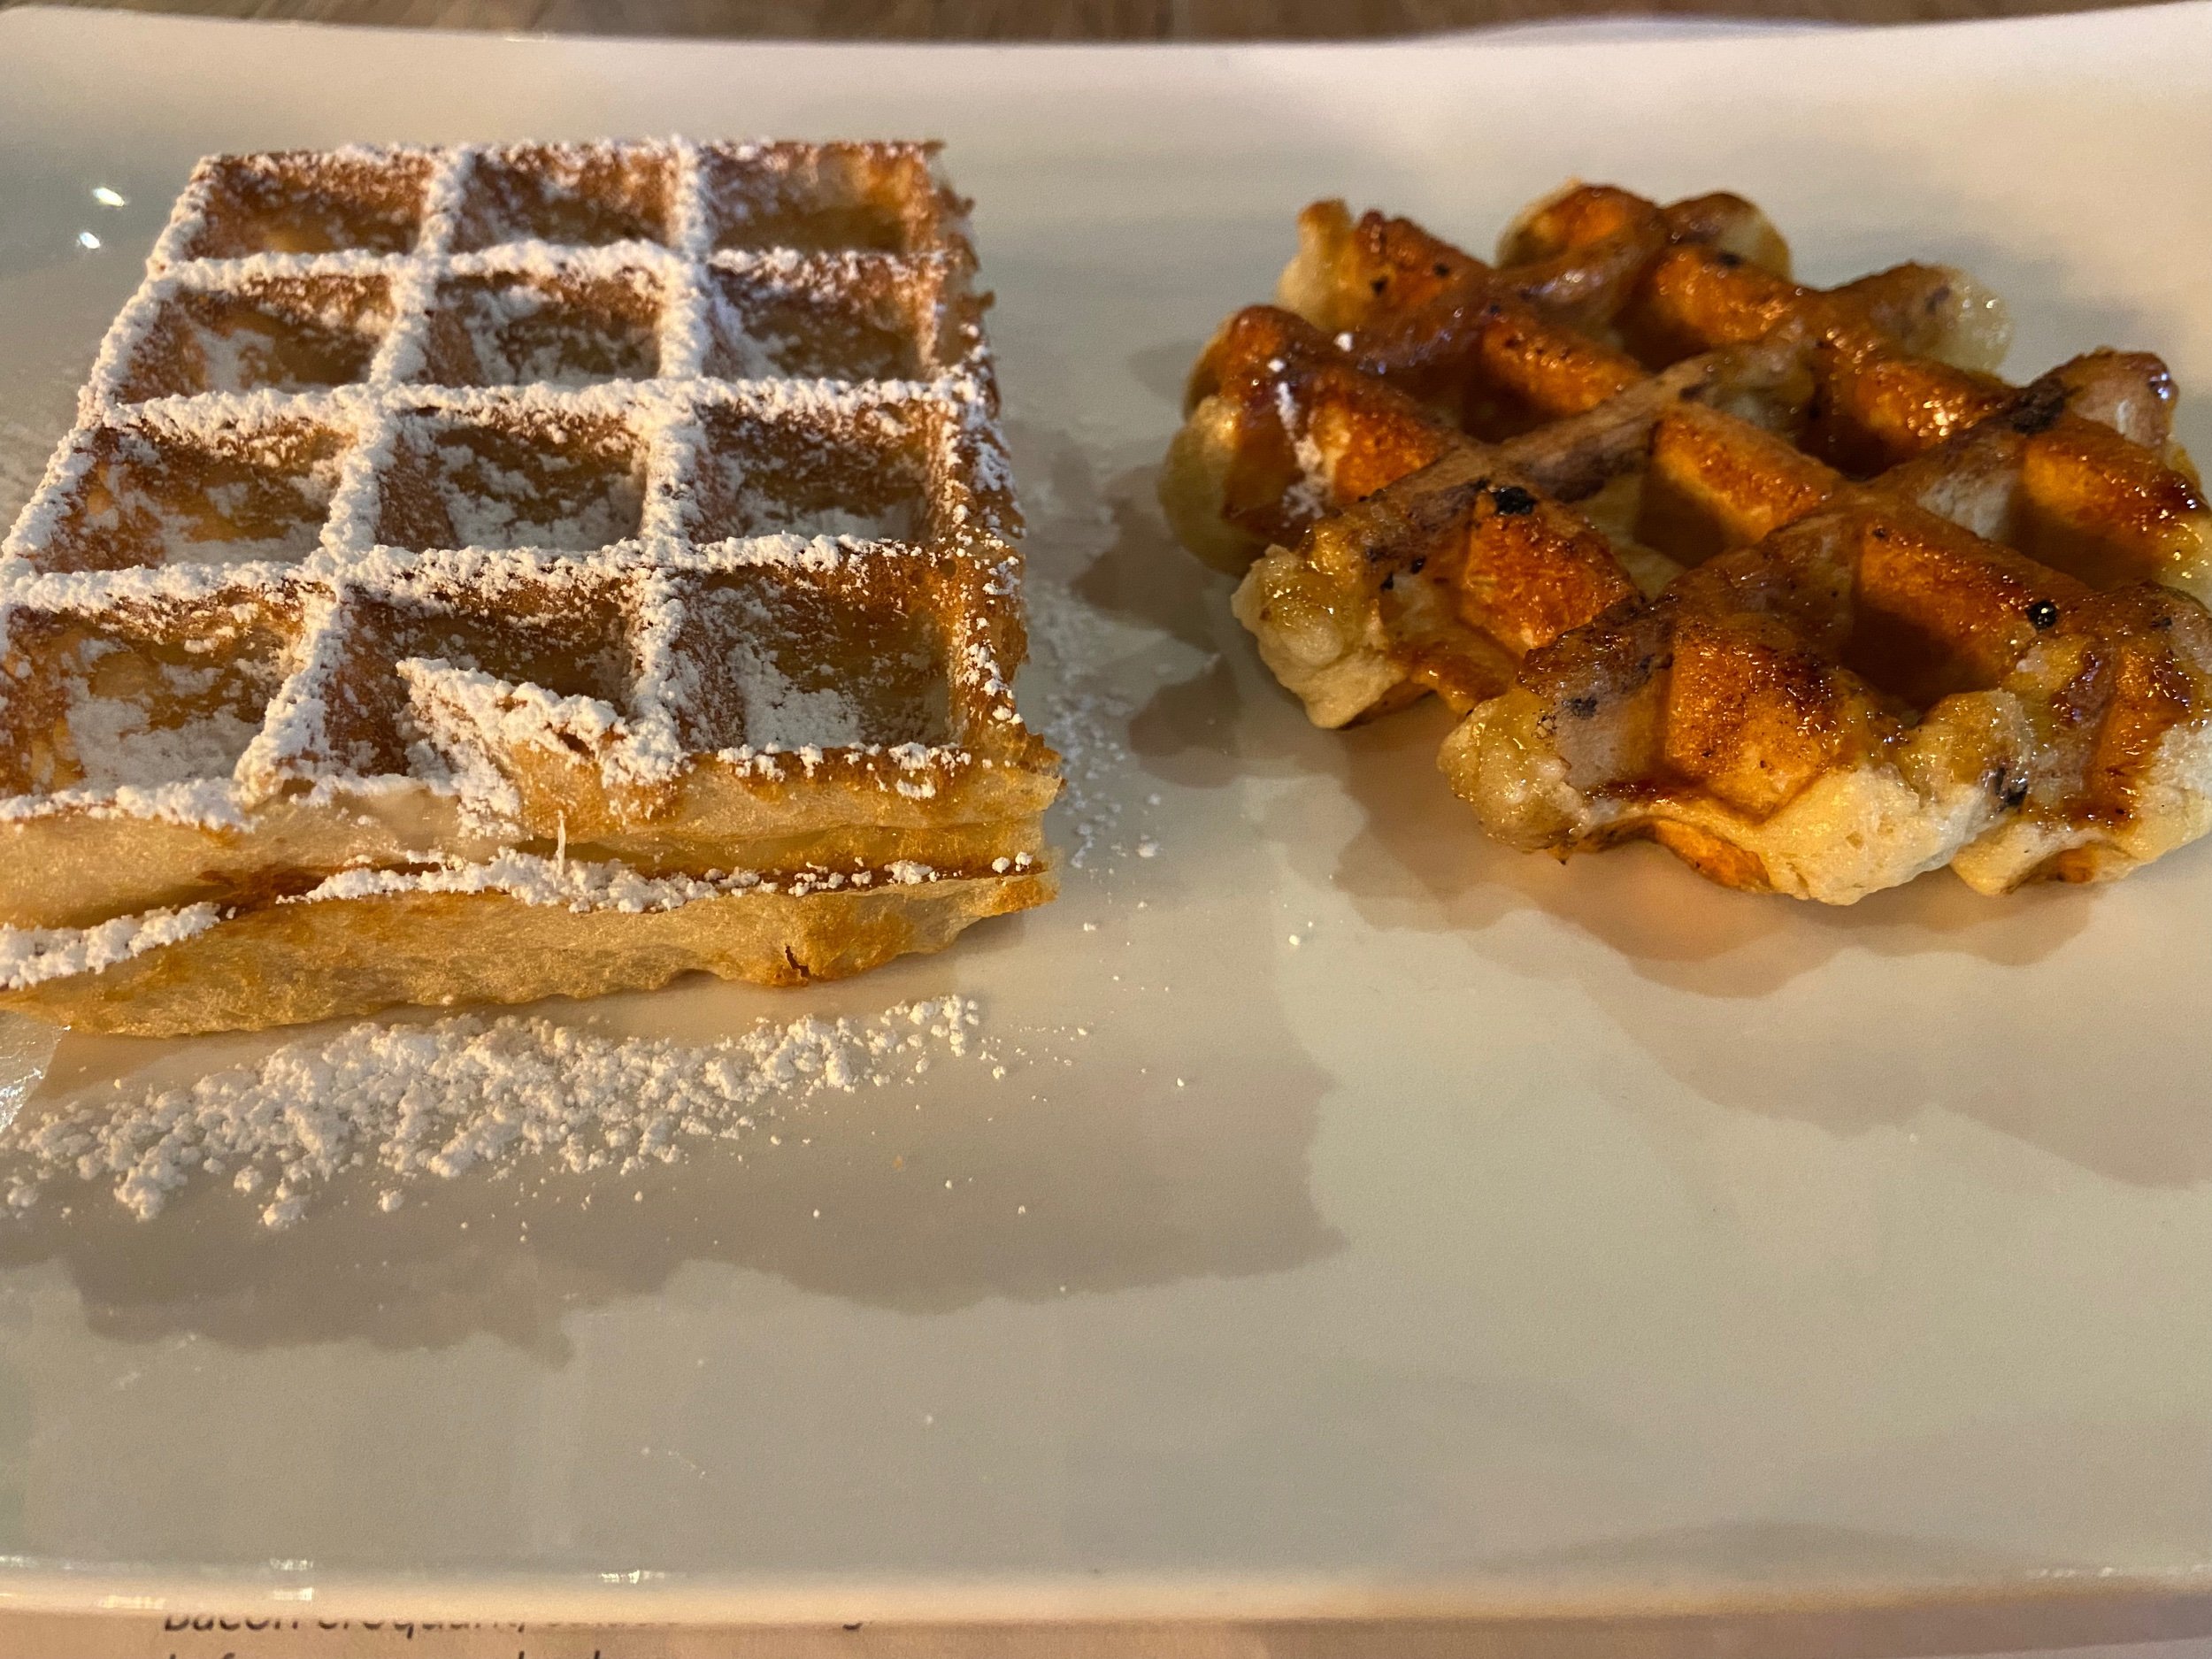  There isn’t such thing as a Belgian waffle - there are the fluffy Brussels waffles and the sweeter and denser Liege waffles. I got to try both and both are delicious. 